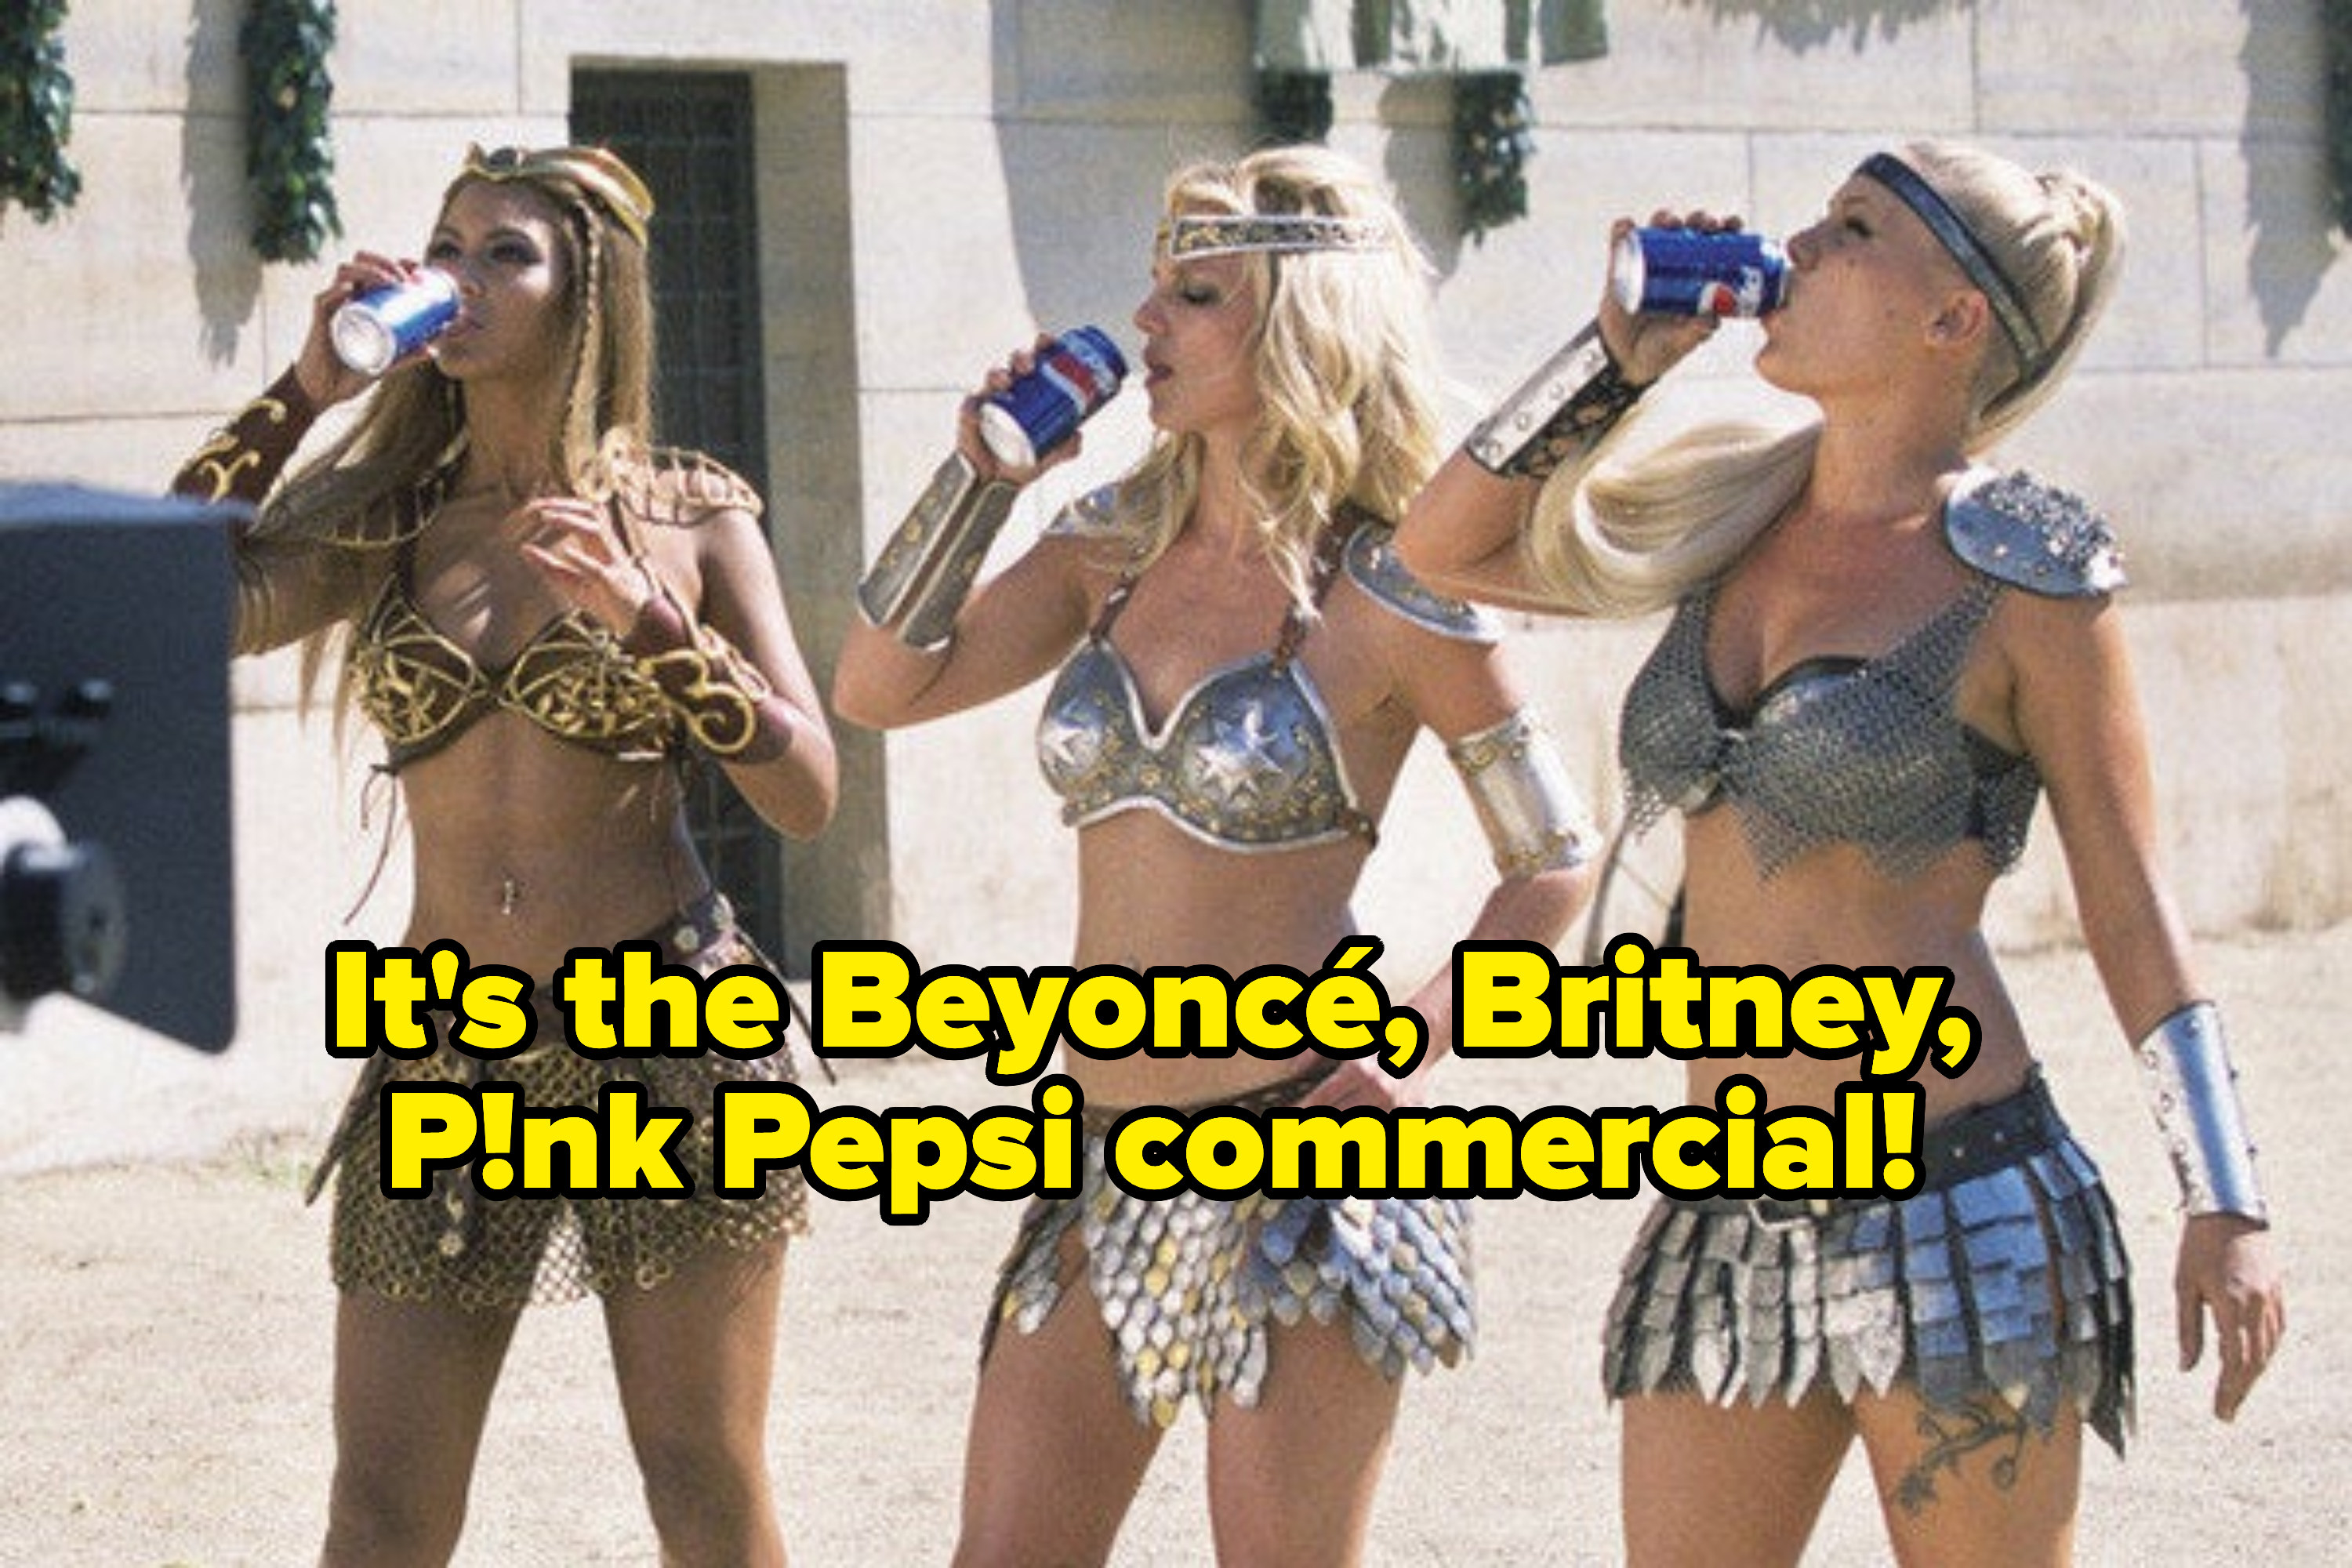 From left to right: Beyoncé, Britney, and Pink dressed as gladiators sipping on cans of Pepsi for the soda&#x27;s commercial